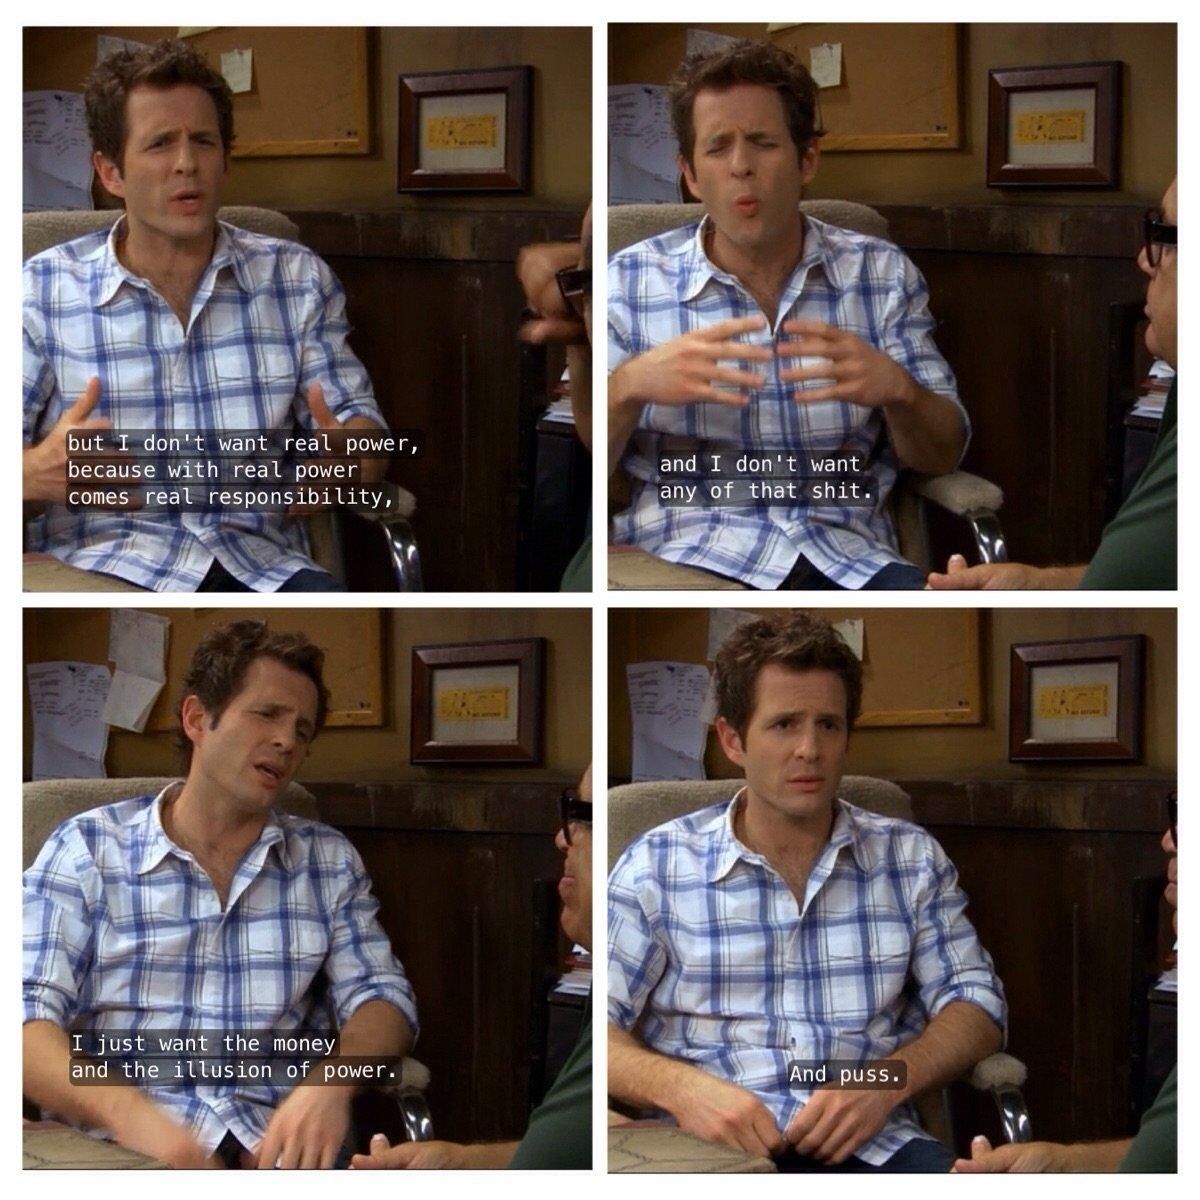 I think we can all relate to Dennis in some way. It's always sunny in Philly.